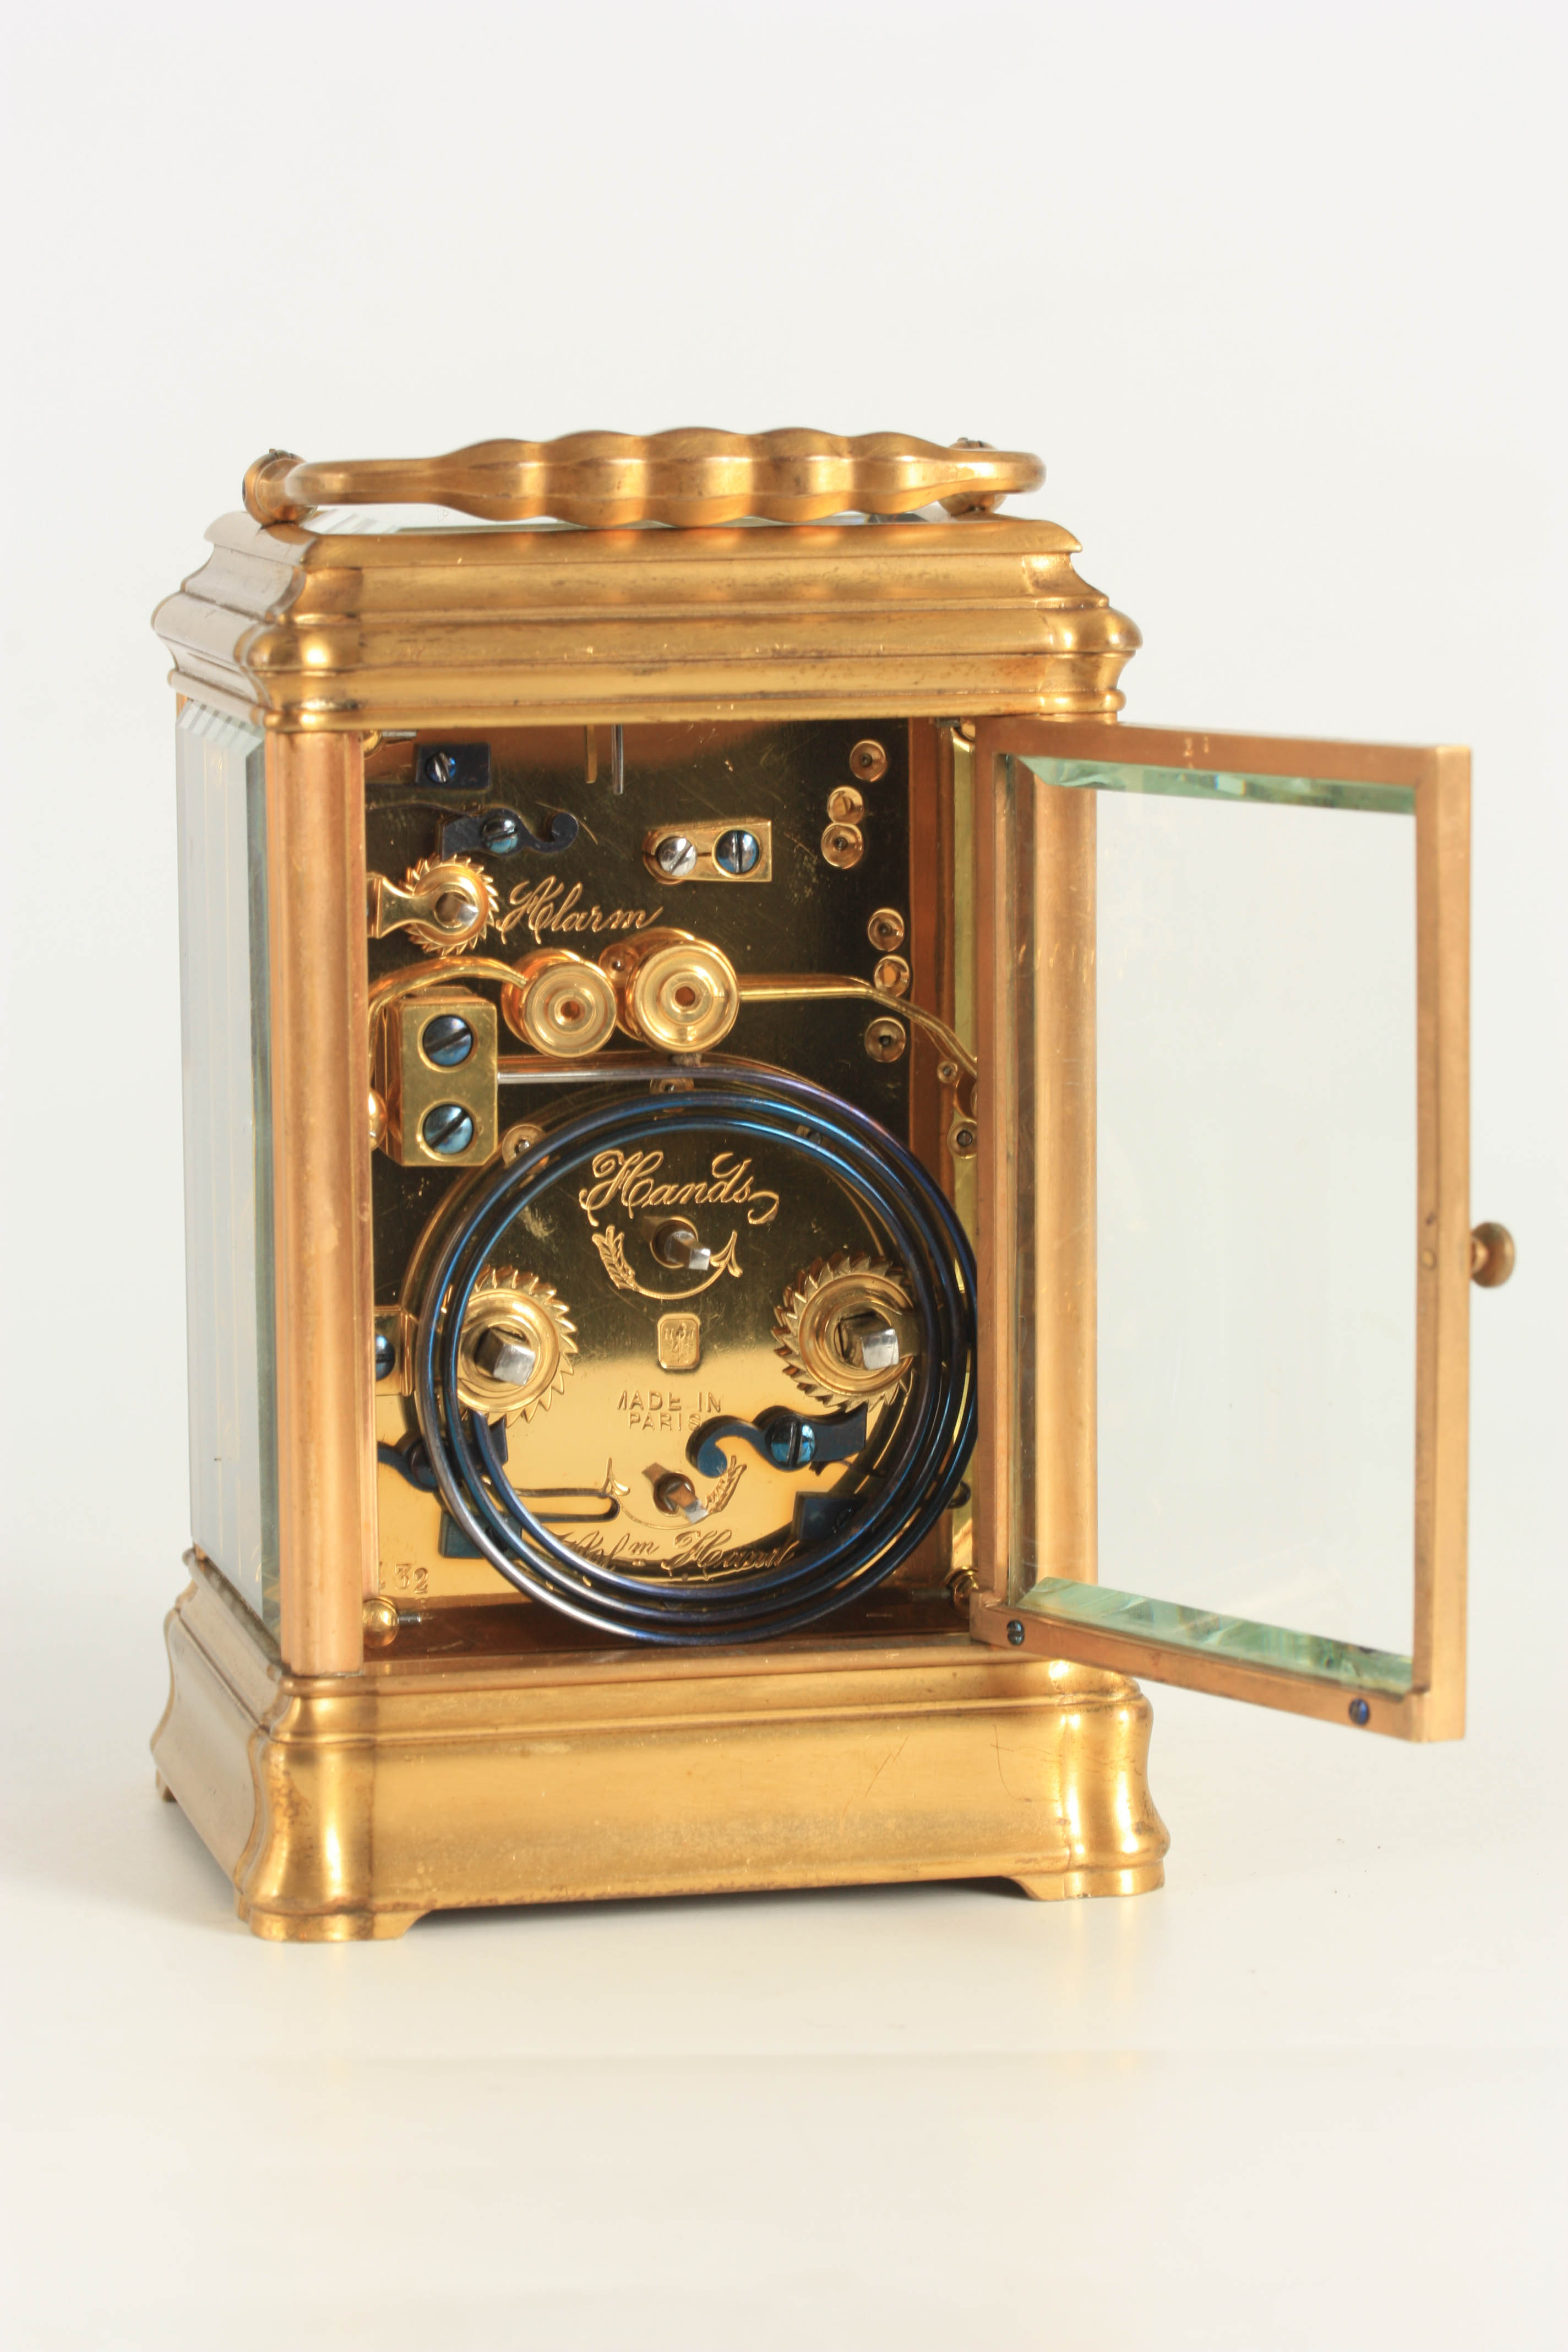 HENRI JACOT, PARIS NO 19132 A LATE 19TH CENTURY FRENCH GILT BRASS GORGE CASE STRIKING CARRIAGE CLOCK - Image 8 of 14